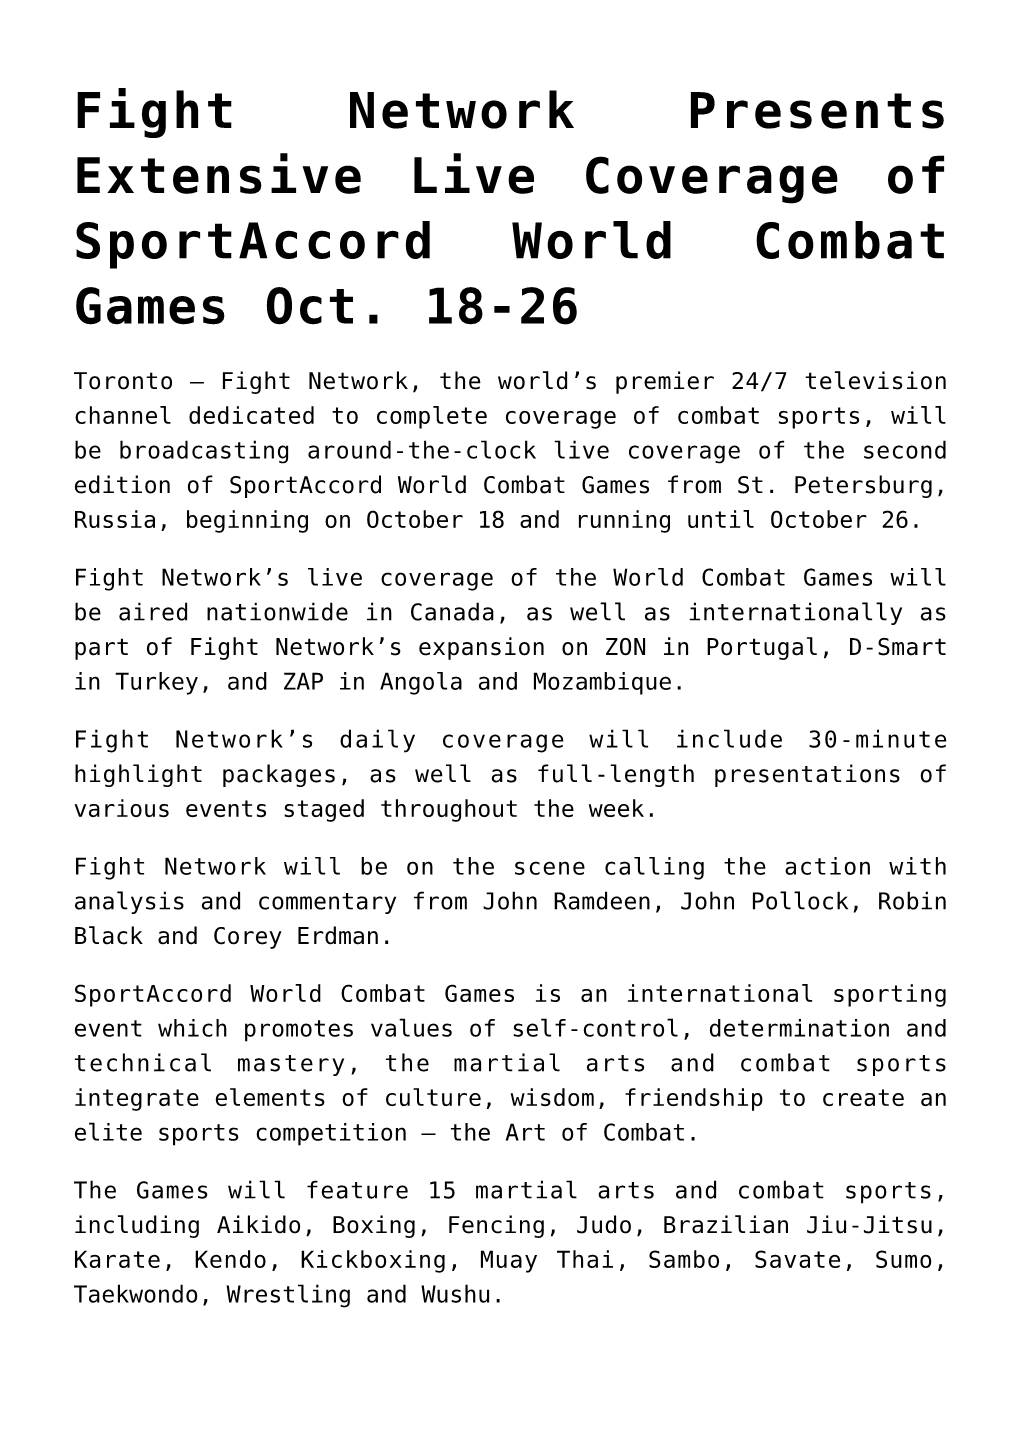 Fight Network Presents Extensive Live Coverage of Sportaccord World Combat Games Oct